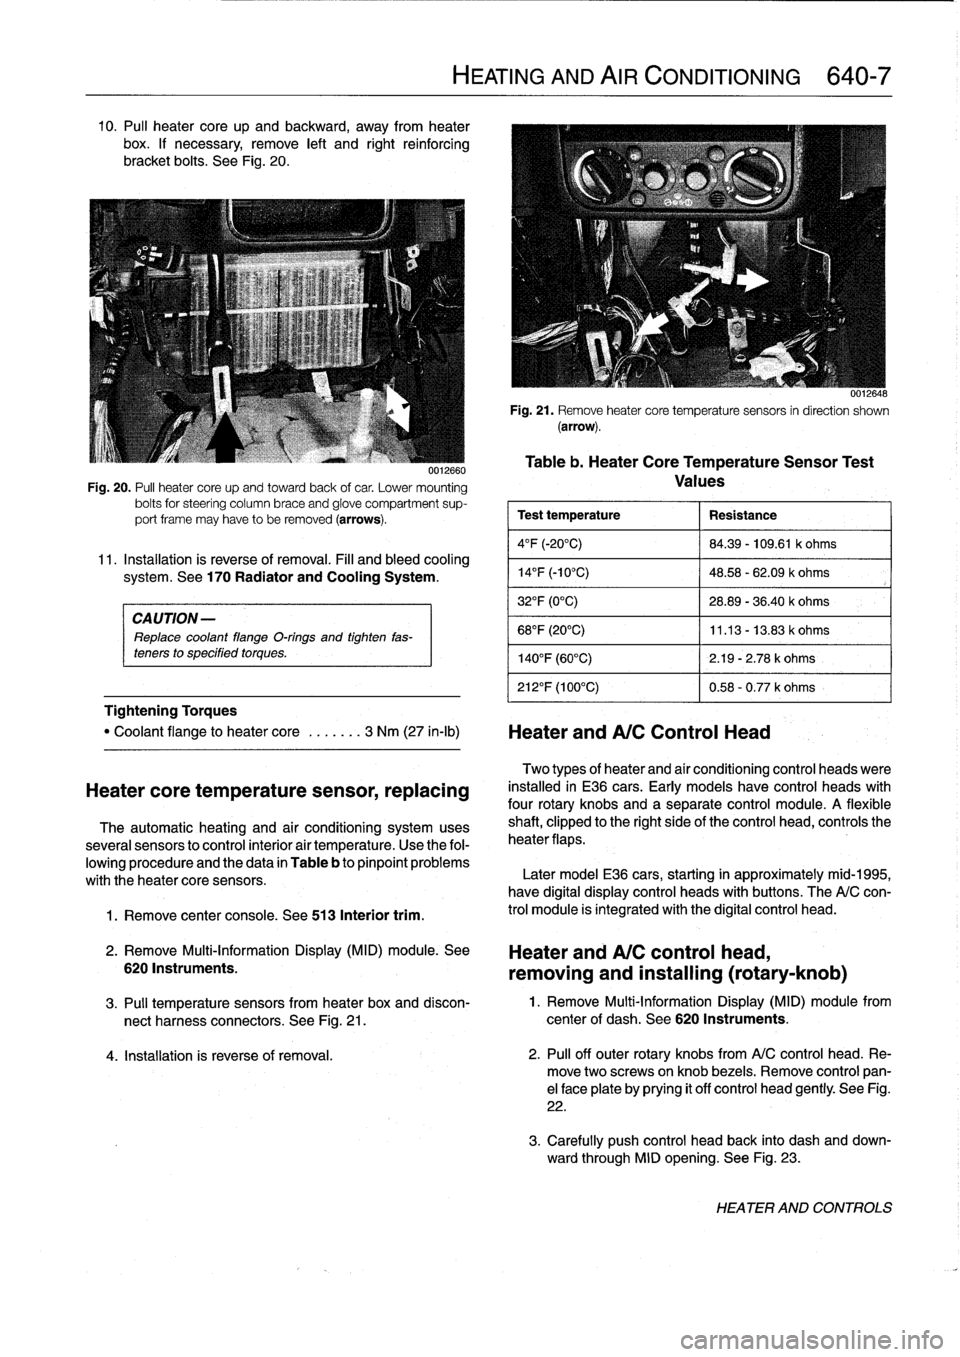 BMW 323i 1995 E36 Workshop Manual 10
.
Pul¡
heater
core
up
and
backward,
away
from
heater
box
.
If
necessary,
remove
left
and
right
reinforcing
bracket
bolts
.
See
Fig
.
20
.

CAUTION-

Replace
coolant
flange
O-rings
and
tighten
fas-